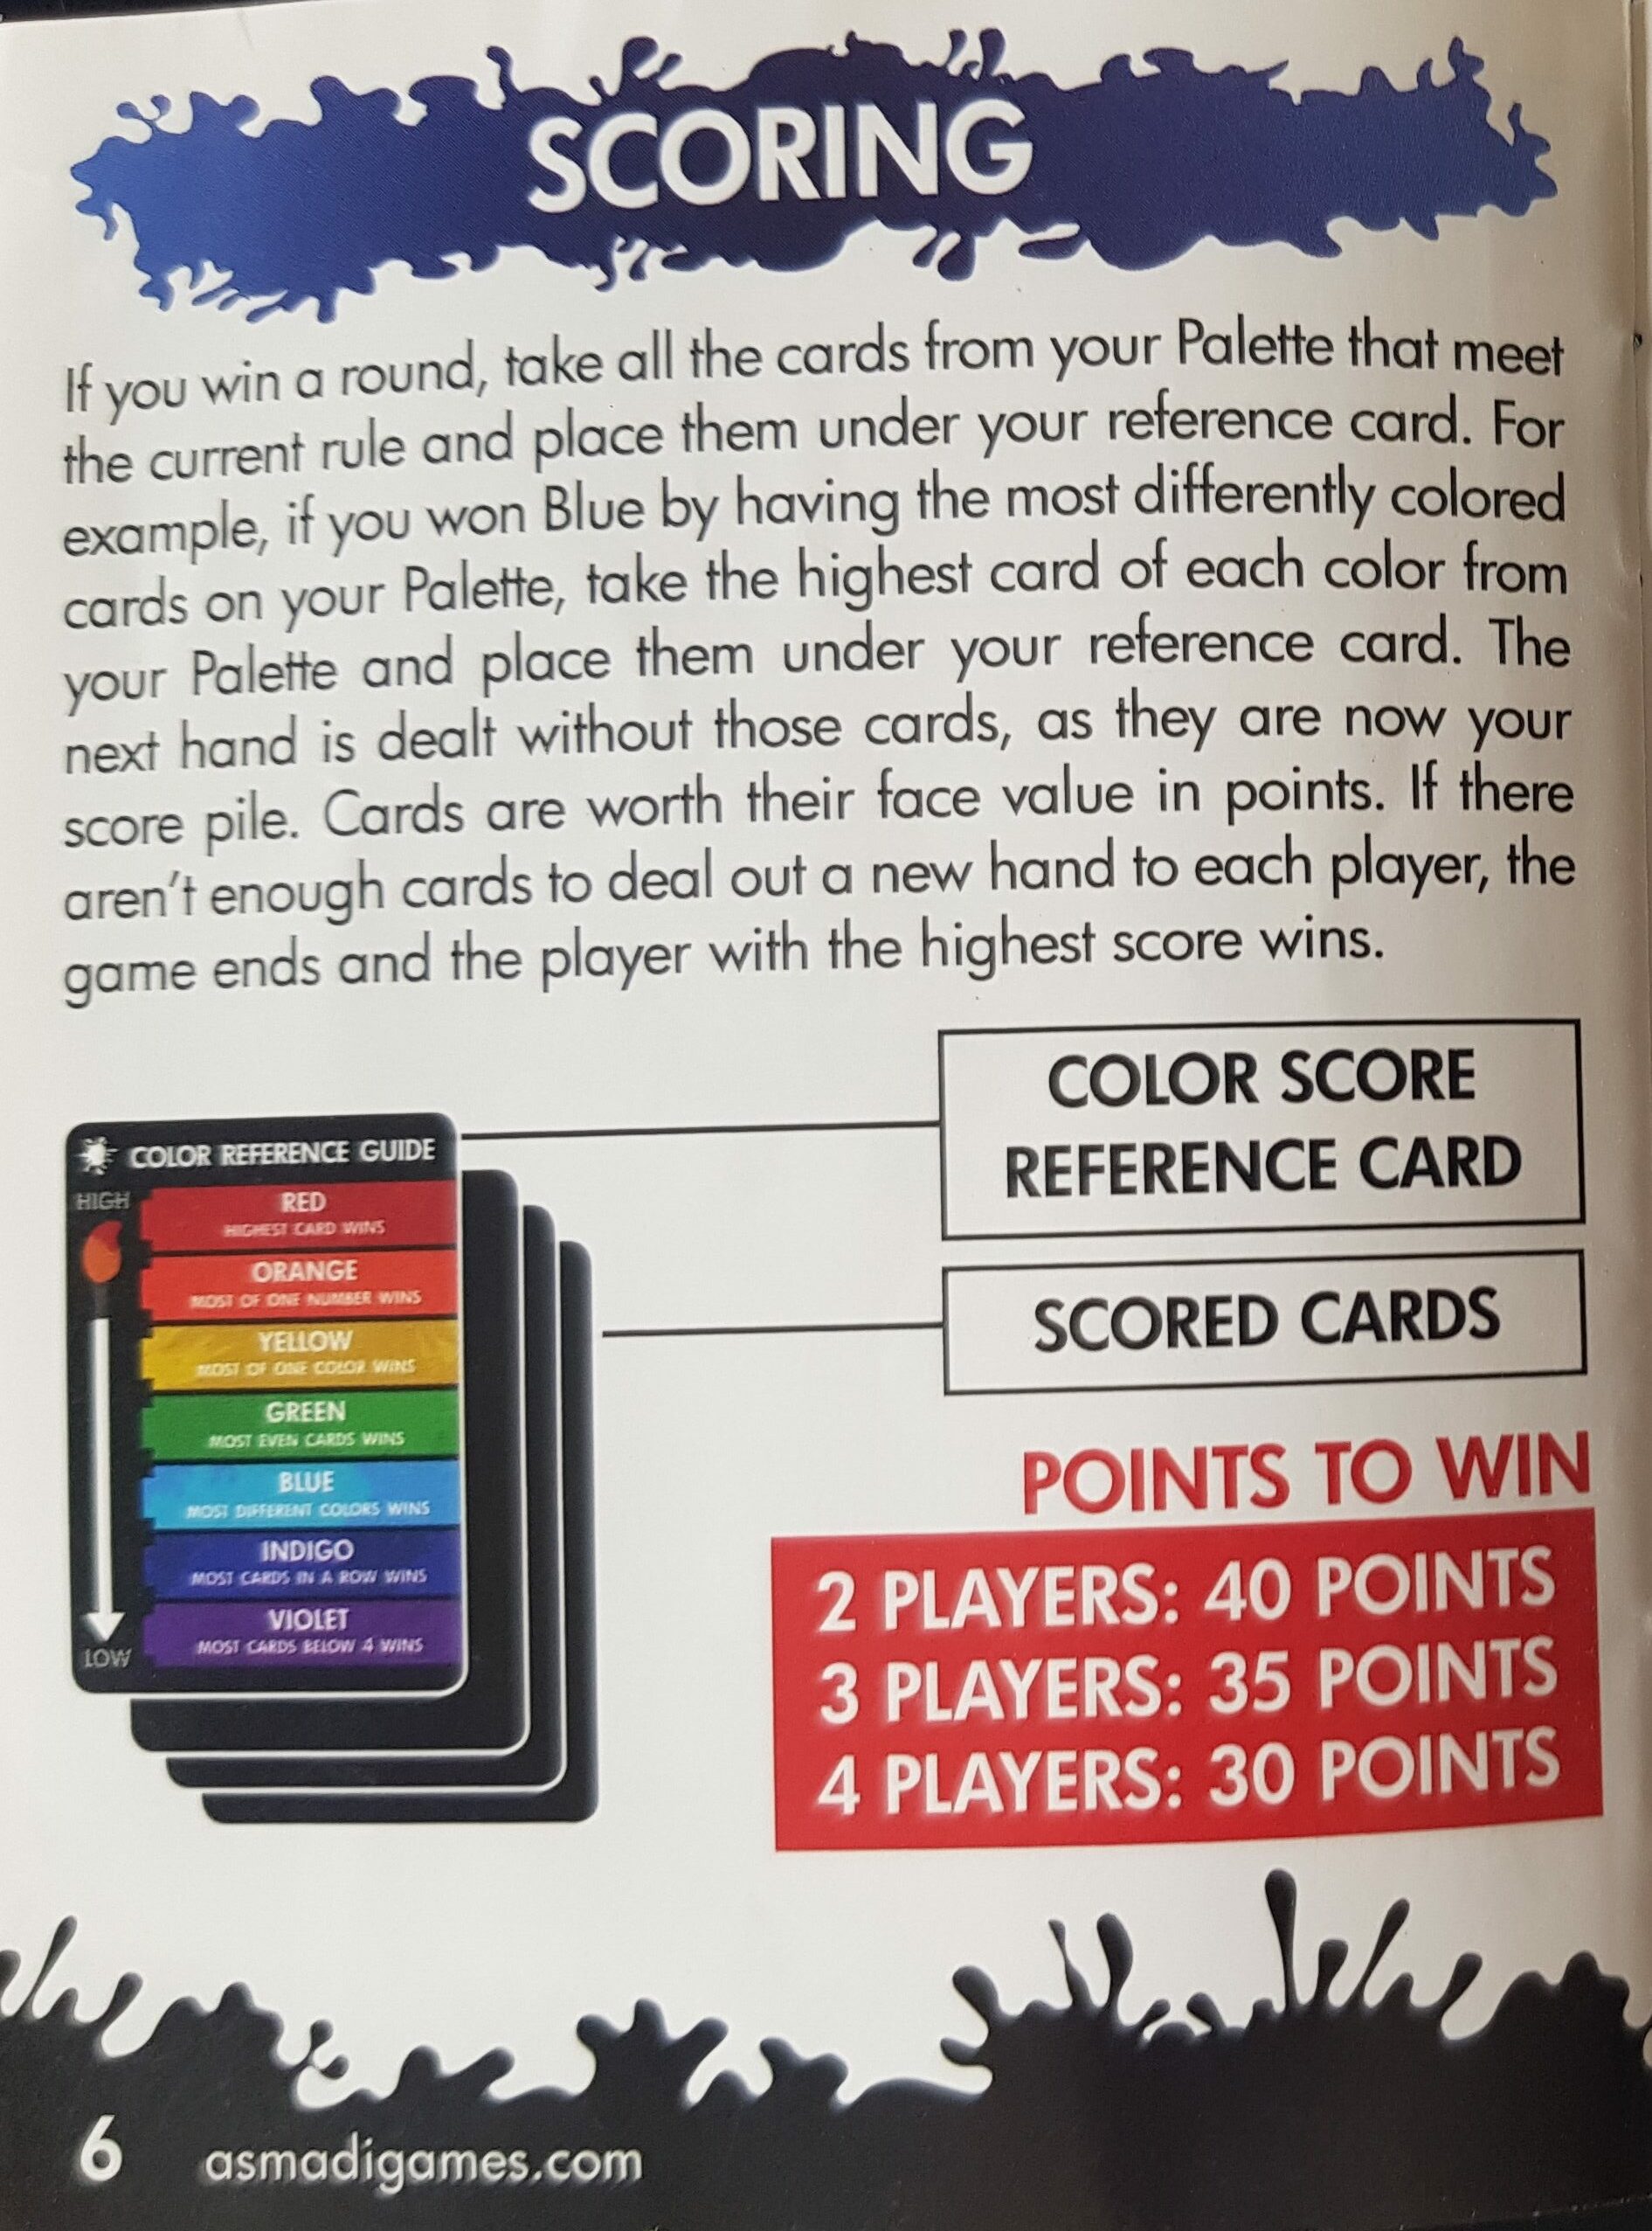 How scoring works in Red7